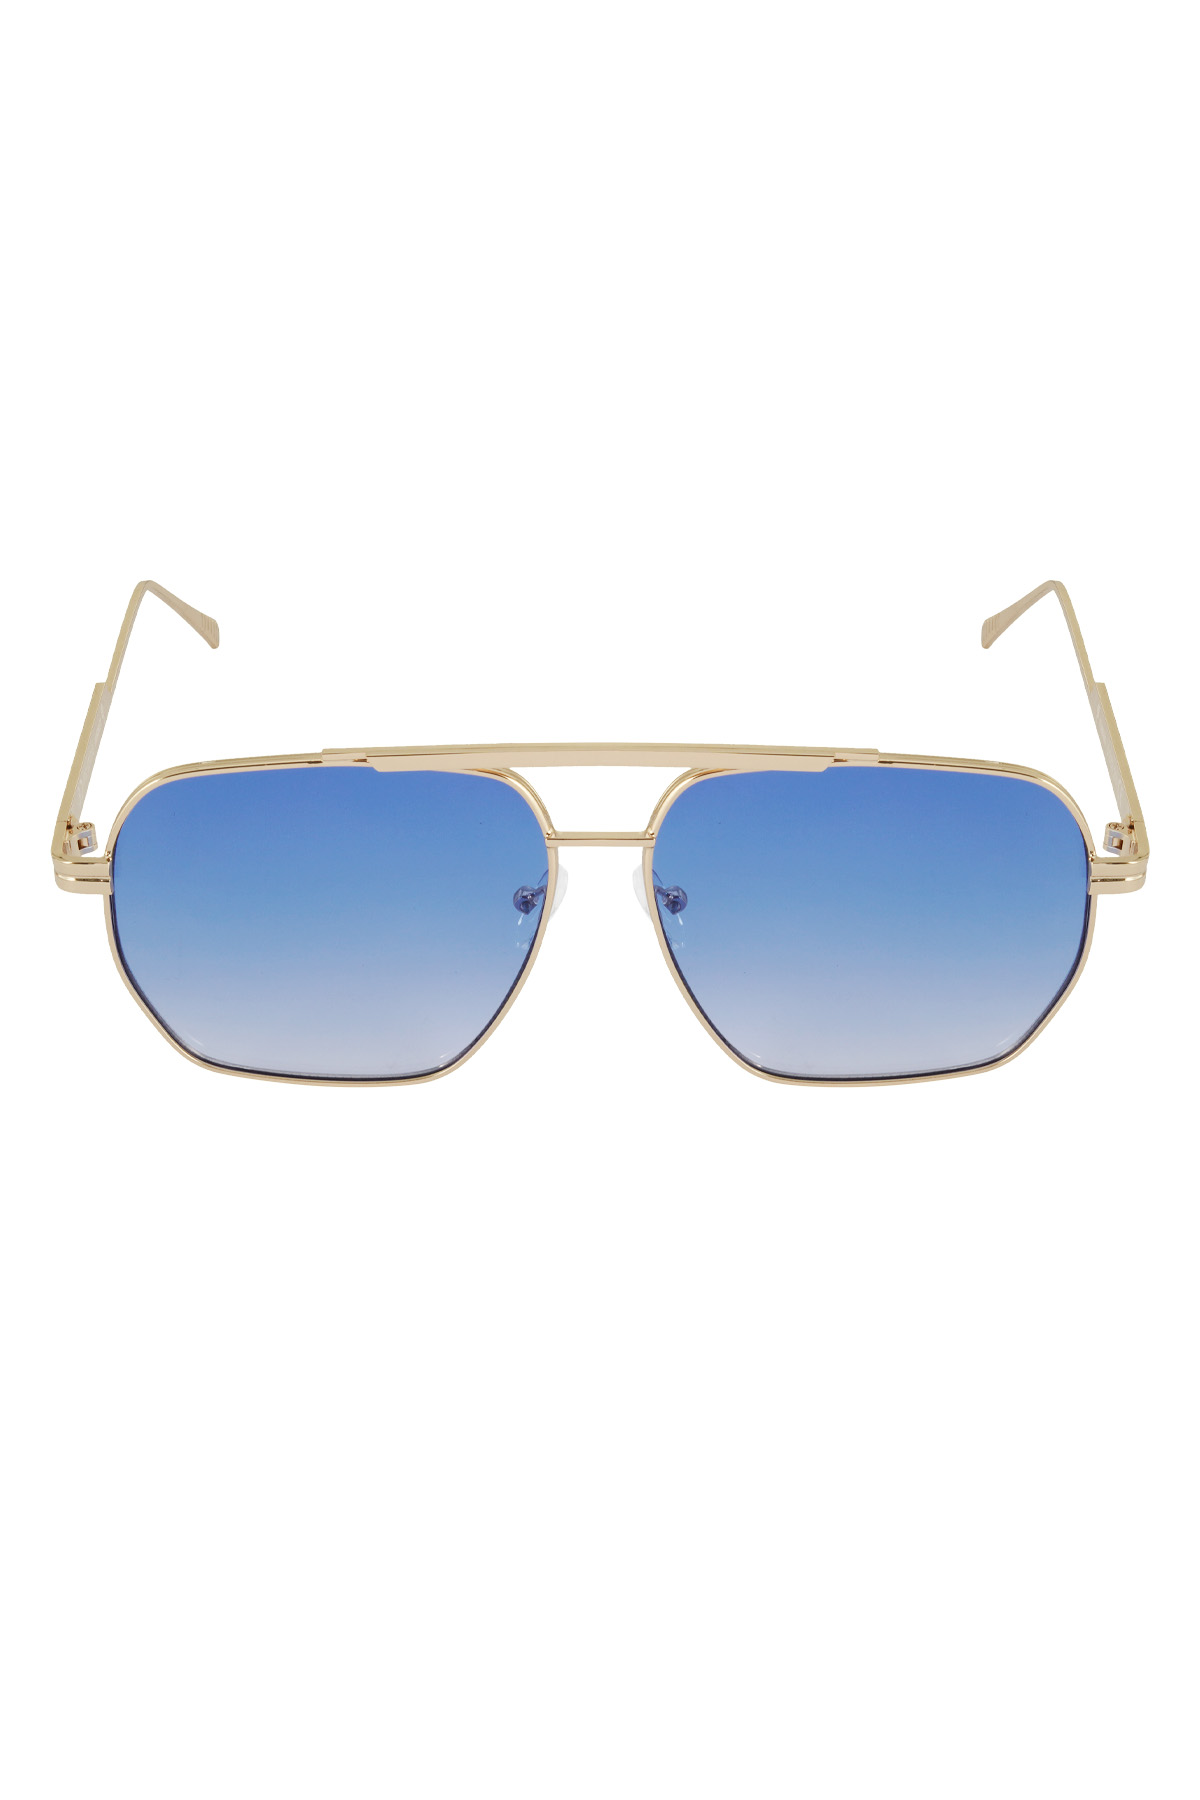 Metal summer sunglasses - Blue and gold h5 Picture4